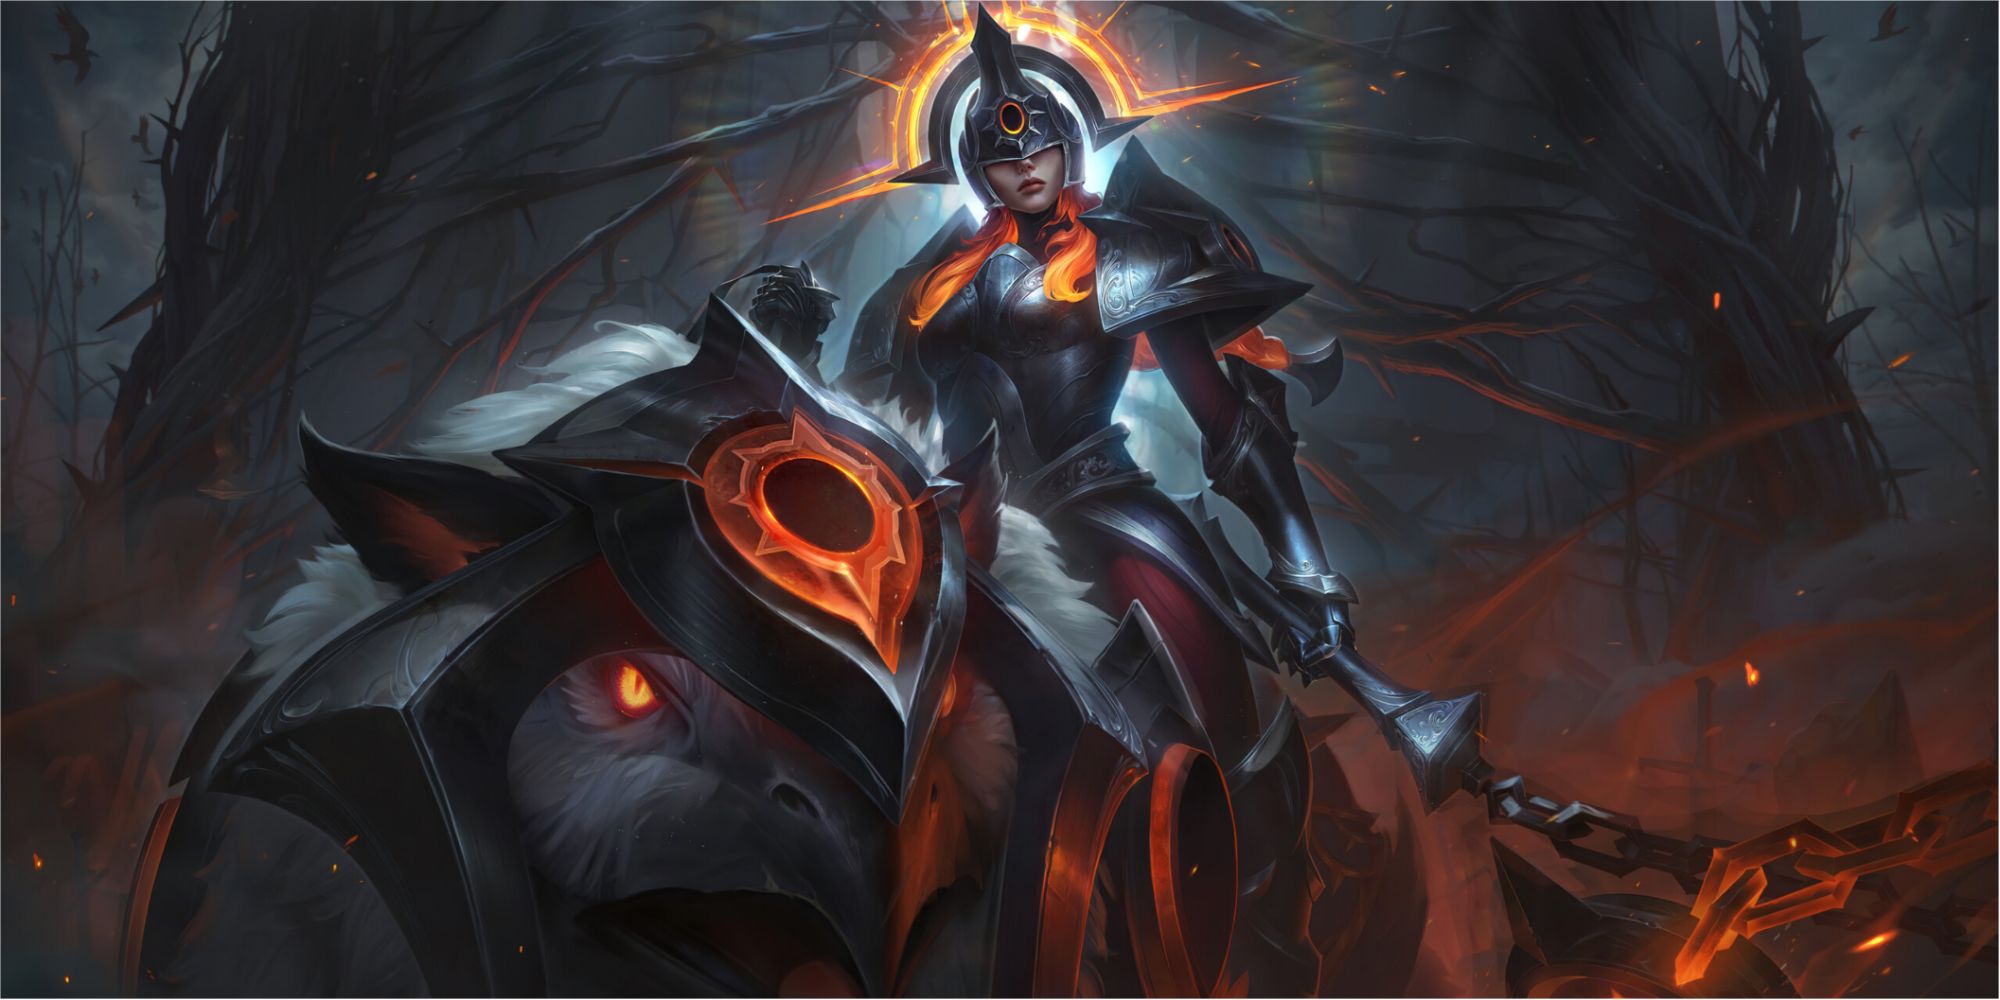 Solar Eclipse Sejuani sitting atop her boar Bristle as a sun crest adorns her head and Bristle looks like an owl bear